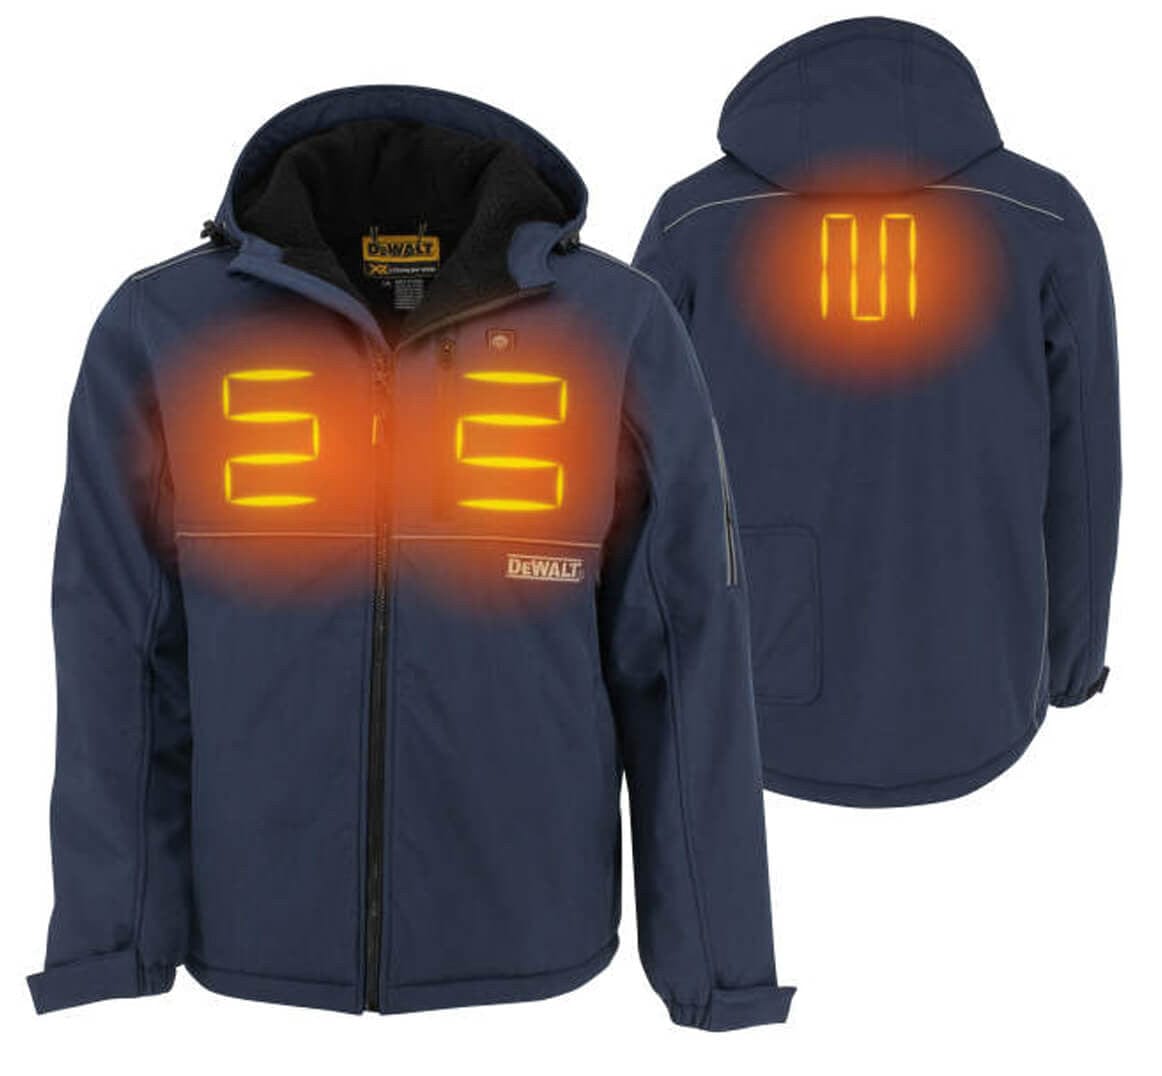 DEWALT Unisex Softshell Heated Navy Jacket With Battery & Charger DCHJ101D1 - Heated Zones